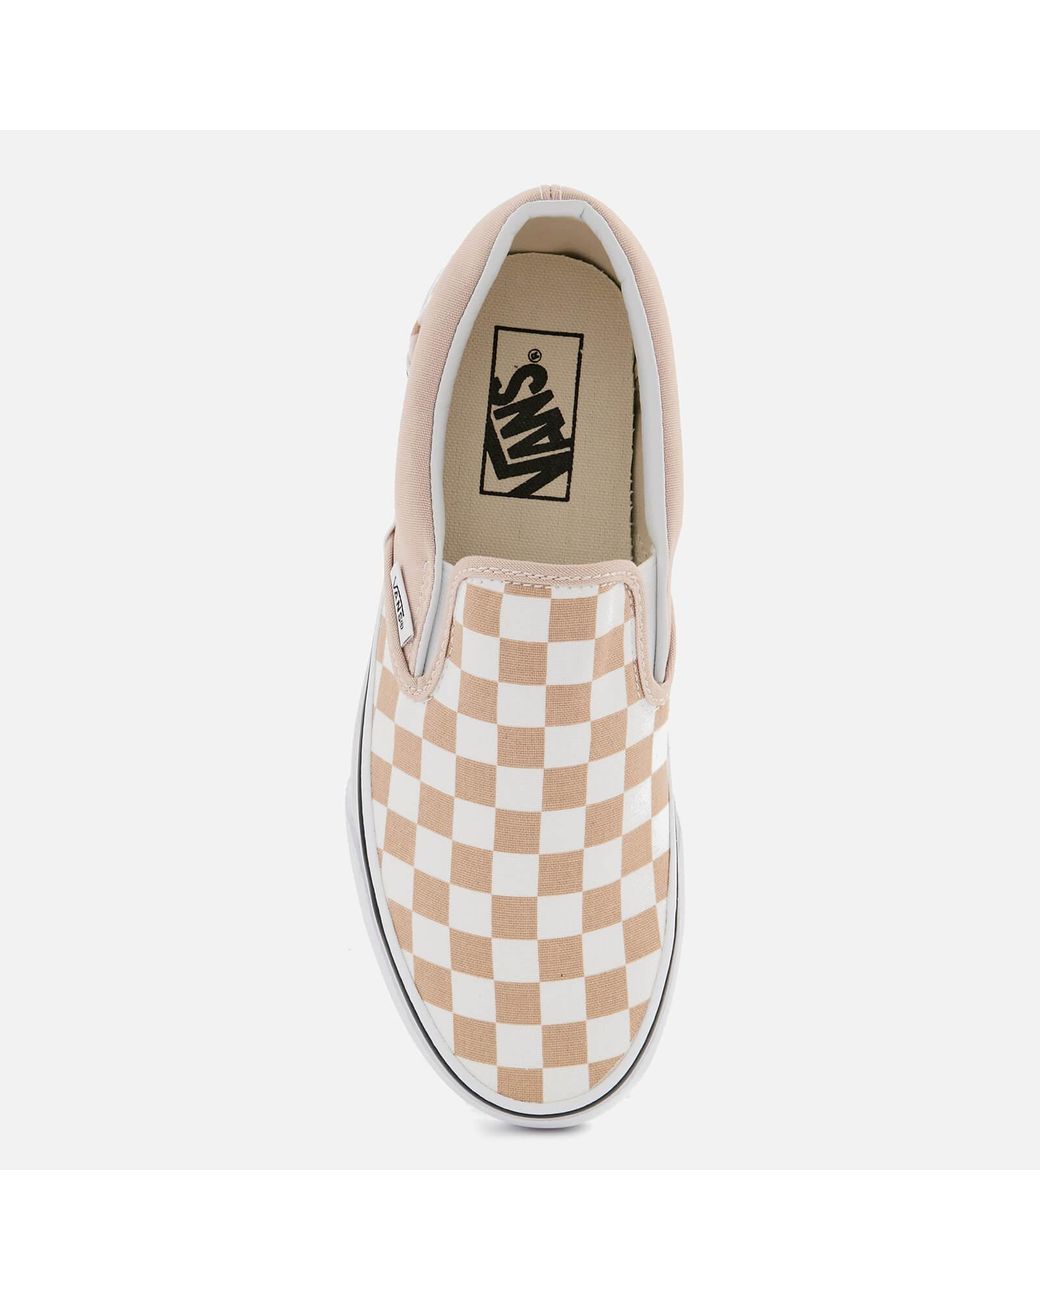 Vans Checkerboard Classic Slip-on Trainers in Natural | Lyst